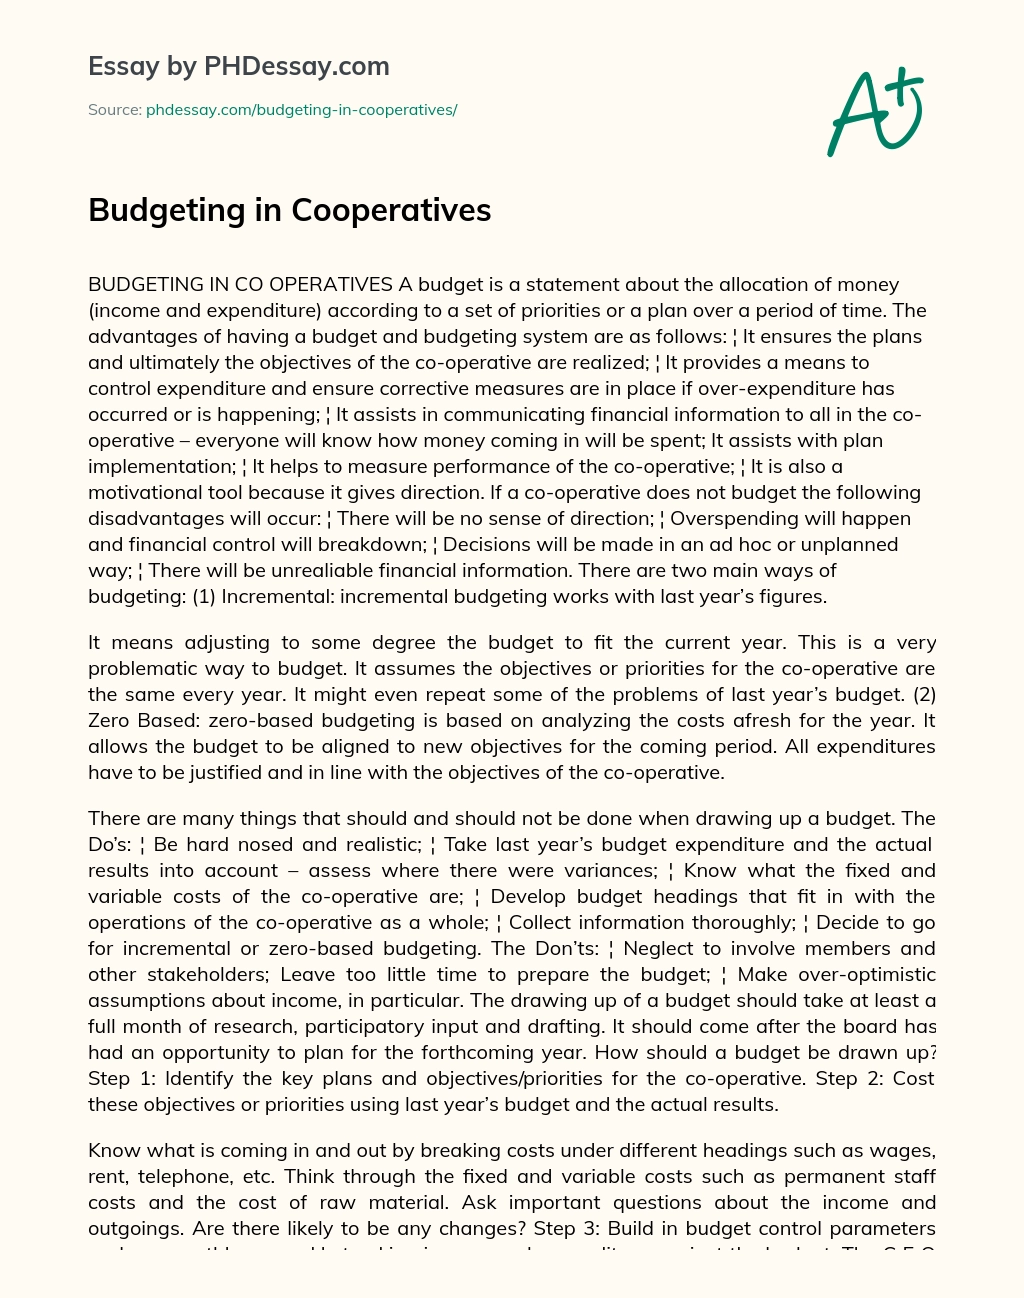 Budgeting in Cooperatives essay